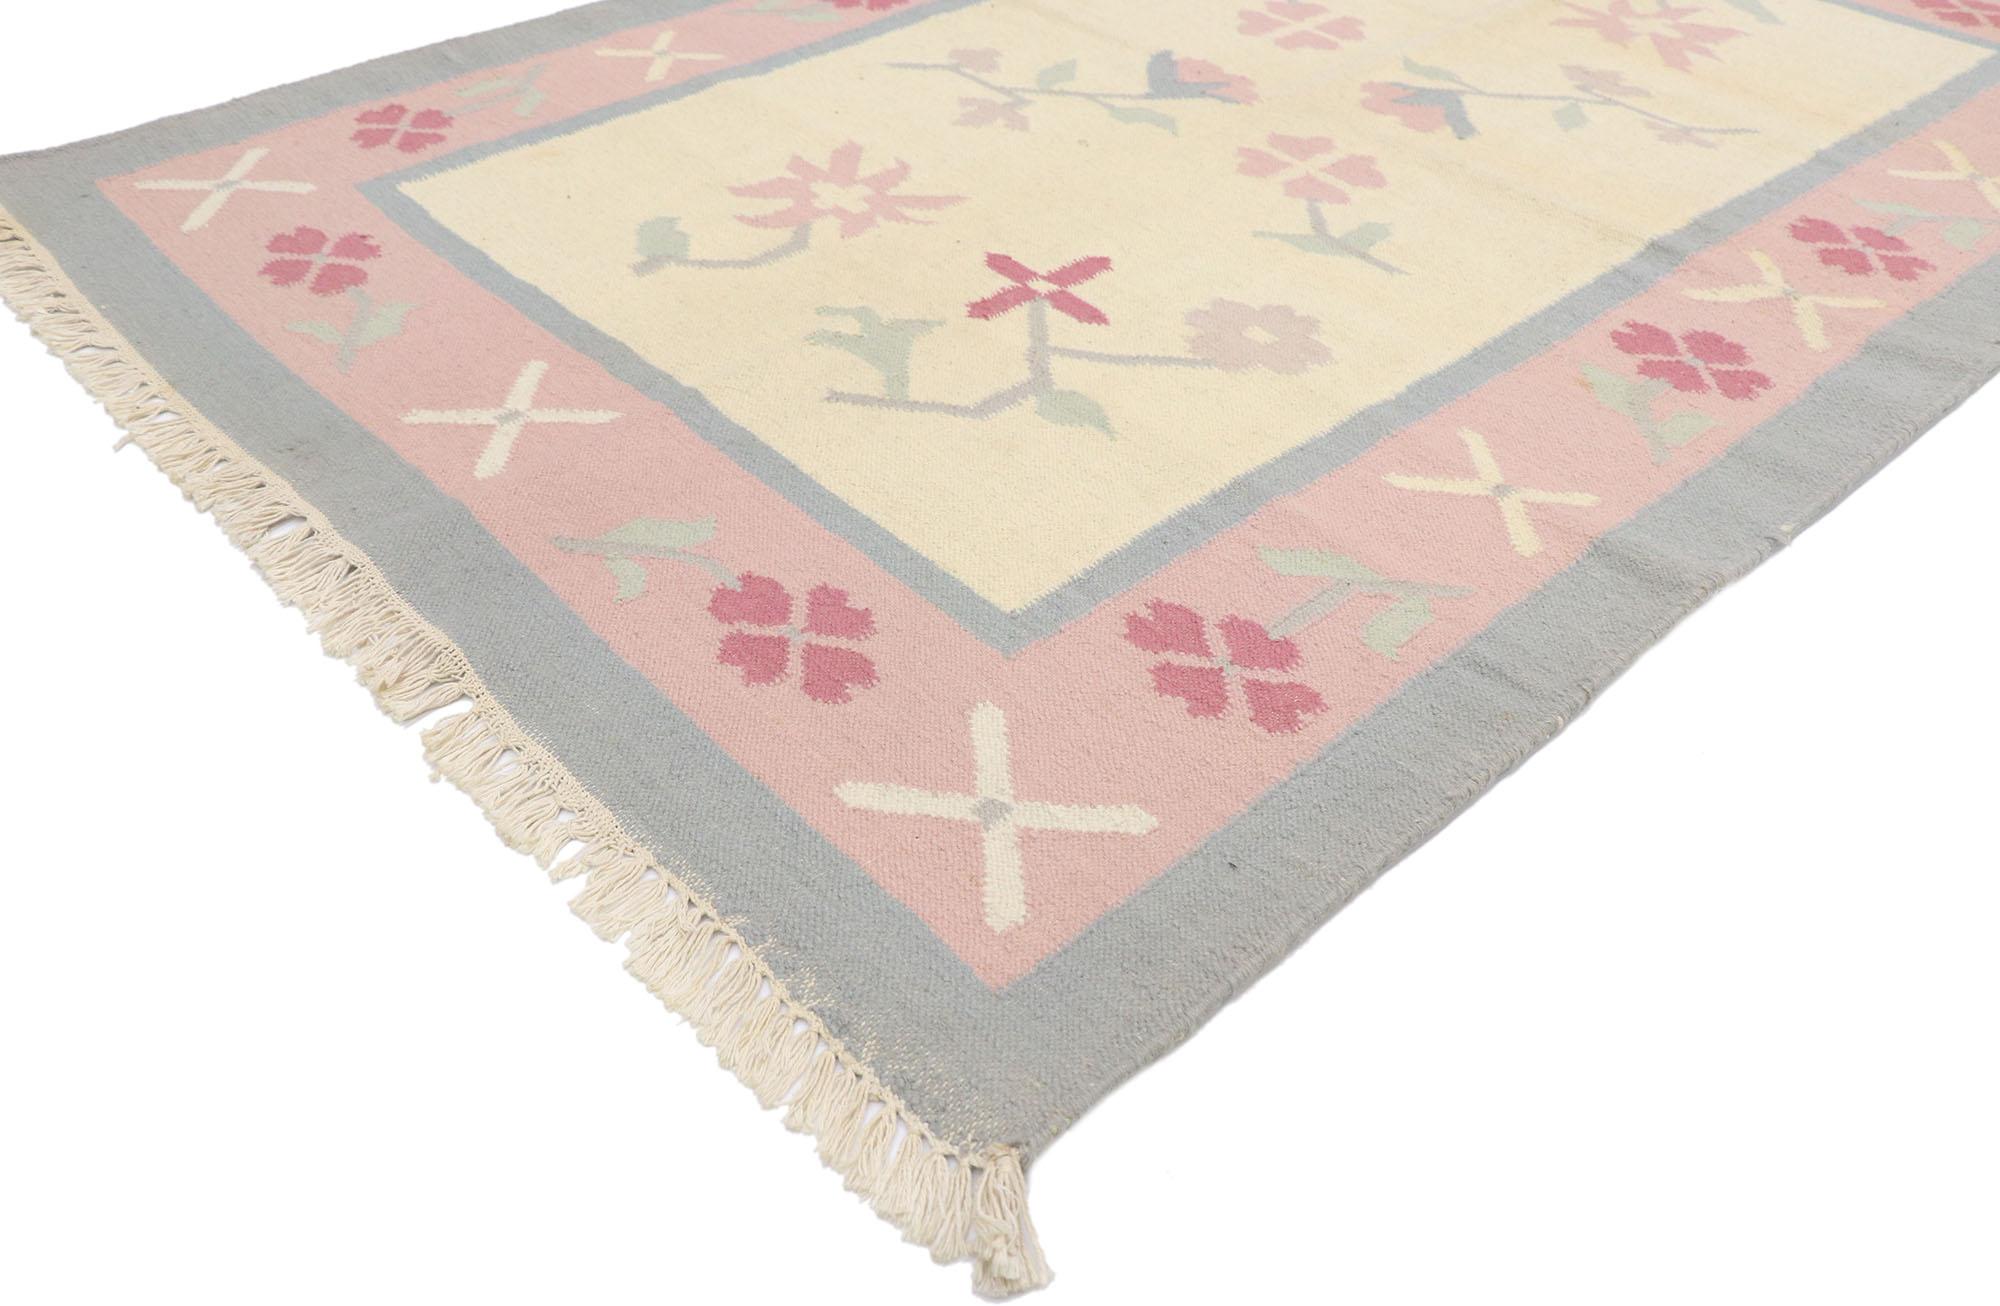 77817 vintage Floral Dhurrie rug 04'02 x 06'00. This hand-woven cotton vintage floral Dhurrie rug features a color blocked field and border festooned with gorgeous floral motifs. Stylized florals elegantly float in the abrashed beige field. It is